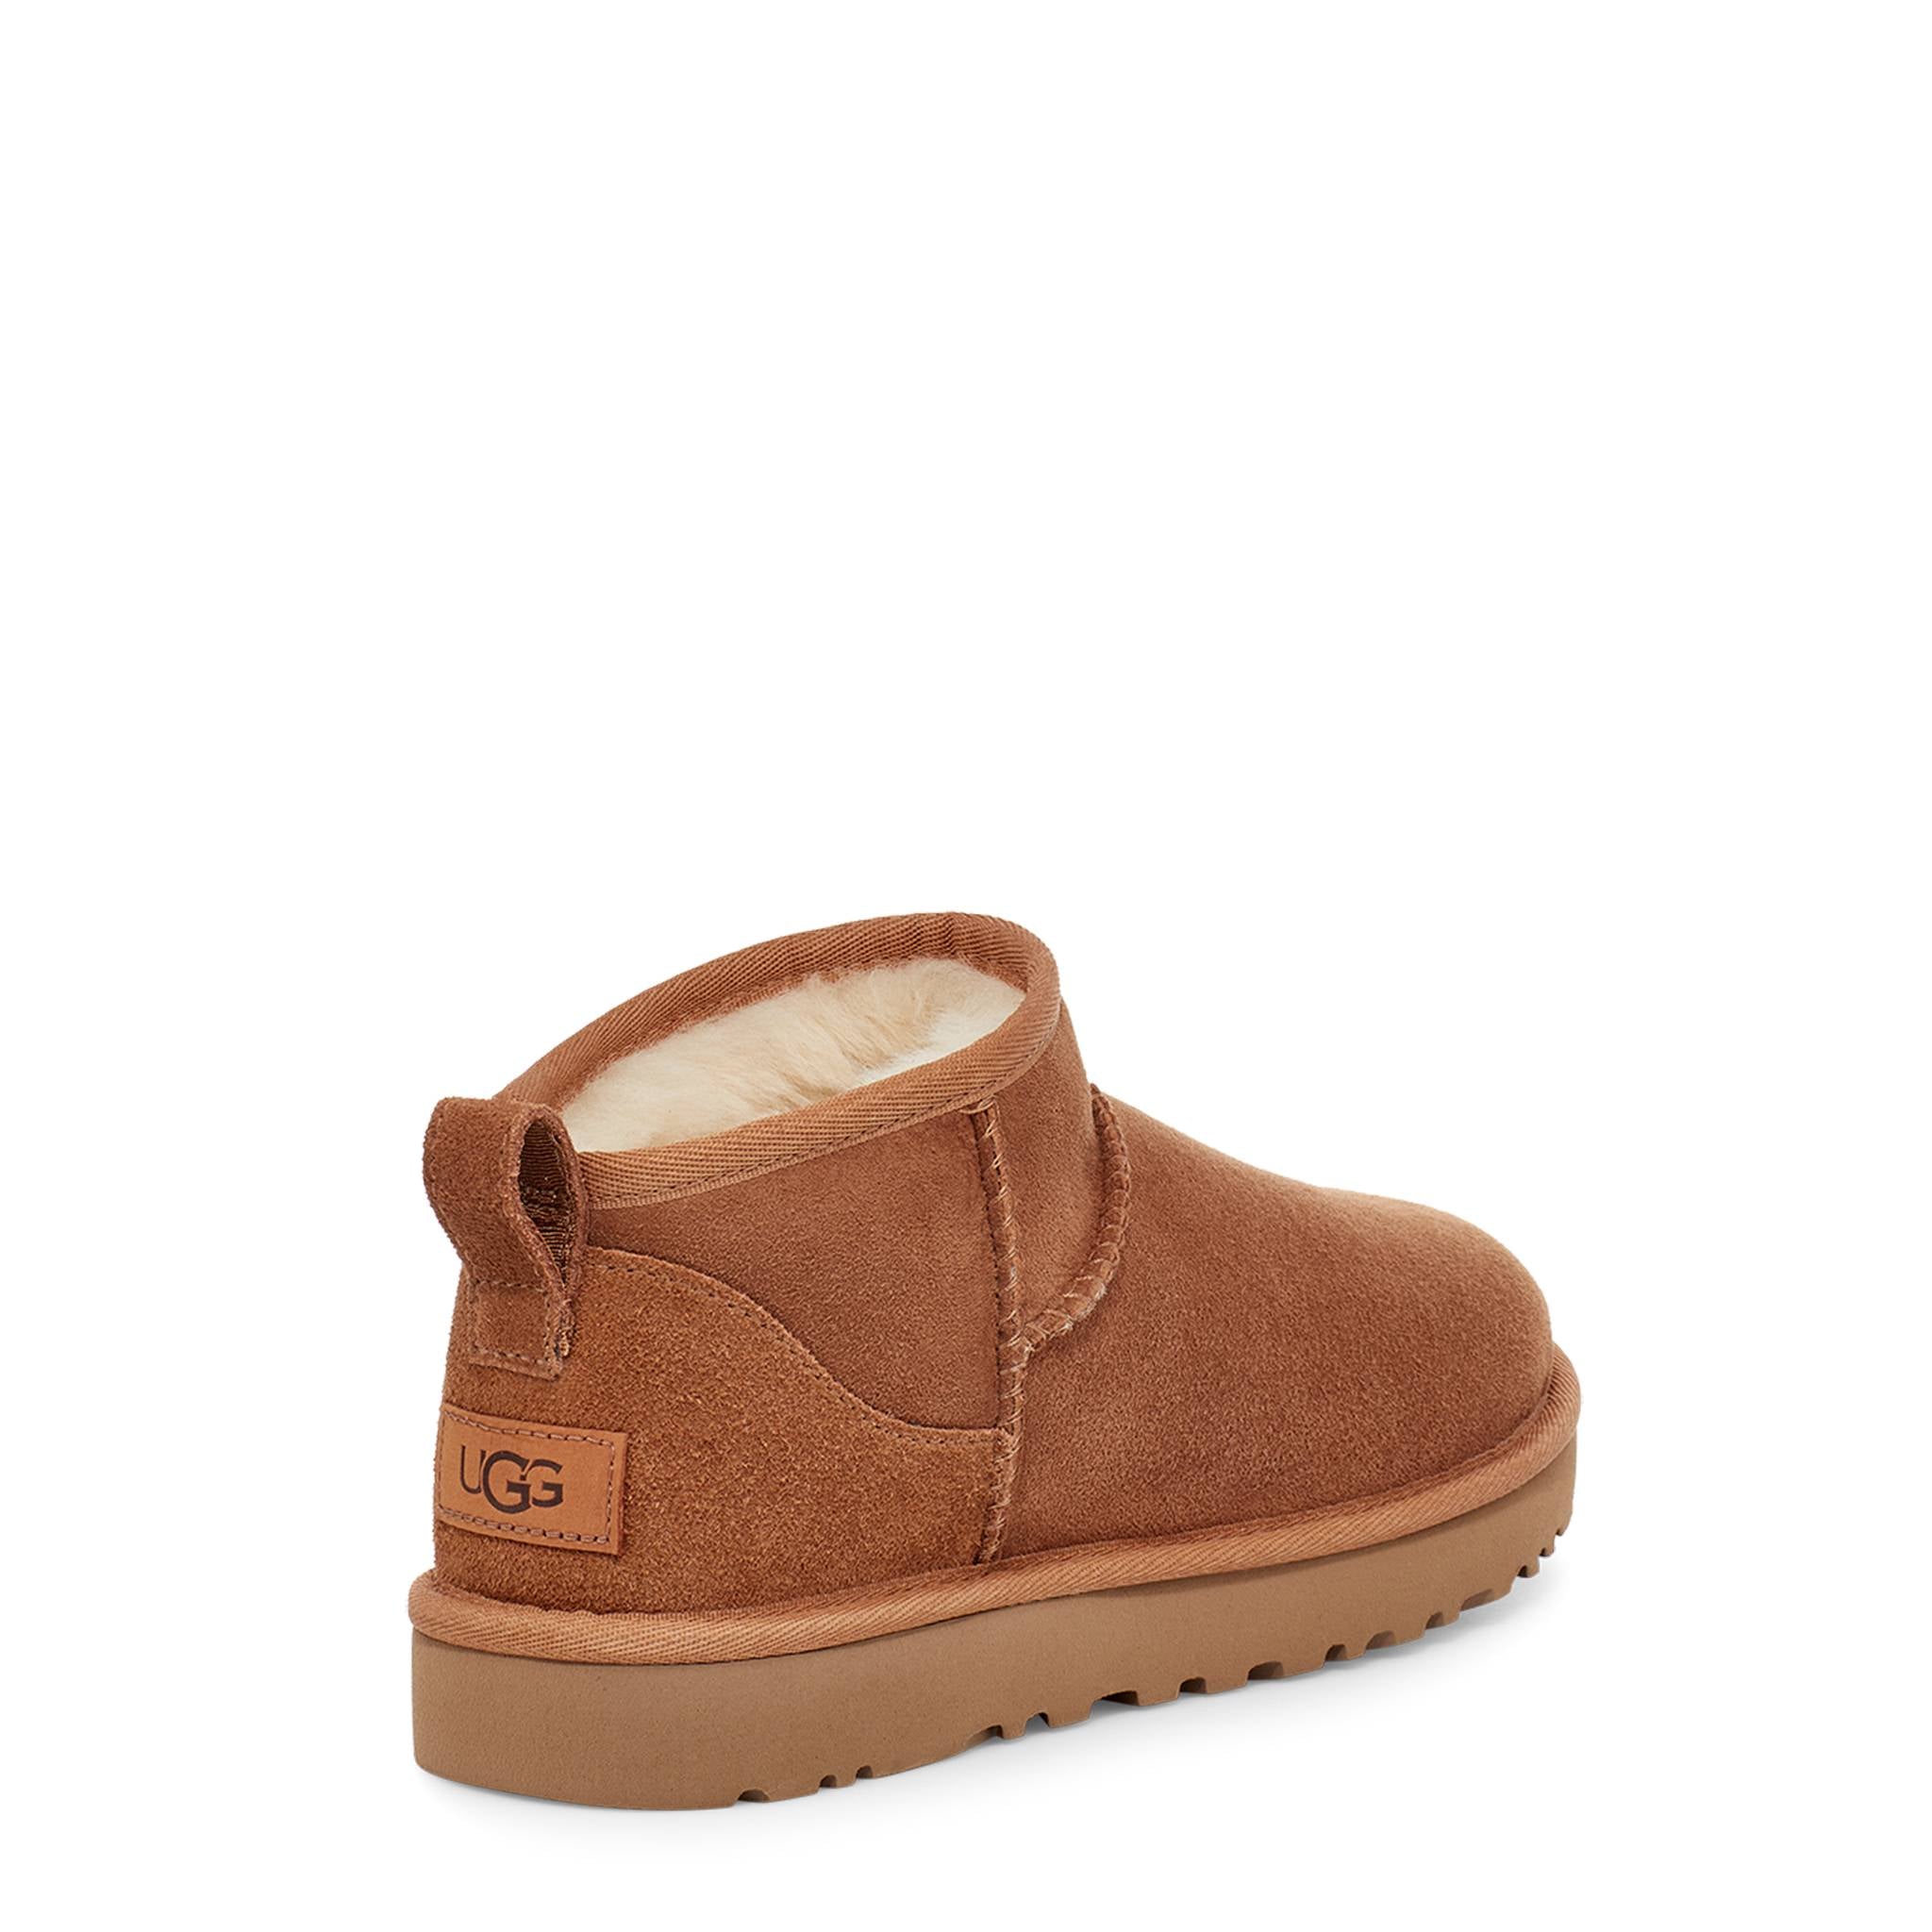 UGG W CLASSIC ULTRA MINI ankle boot 1116109 - Chestnut